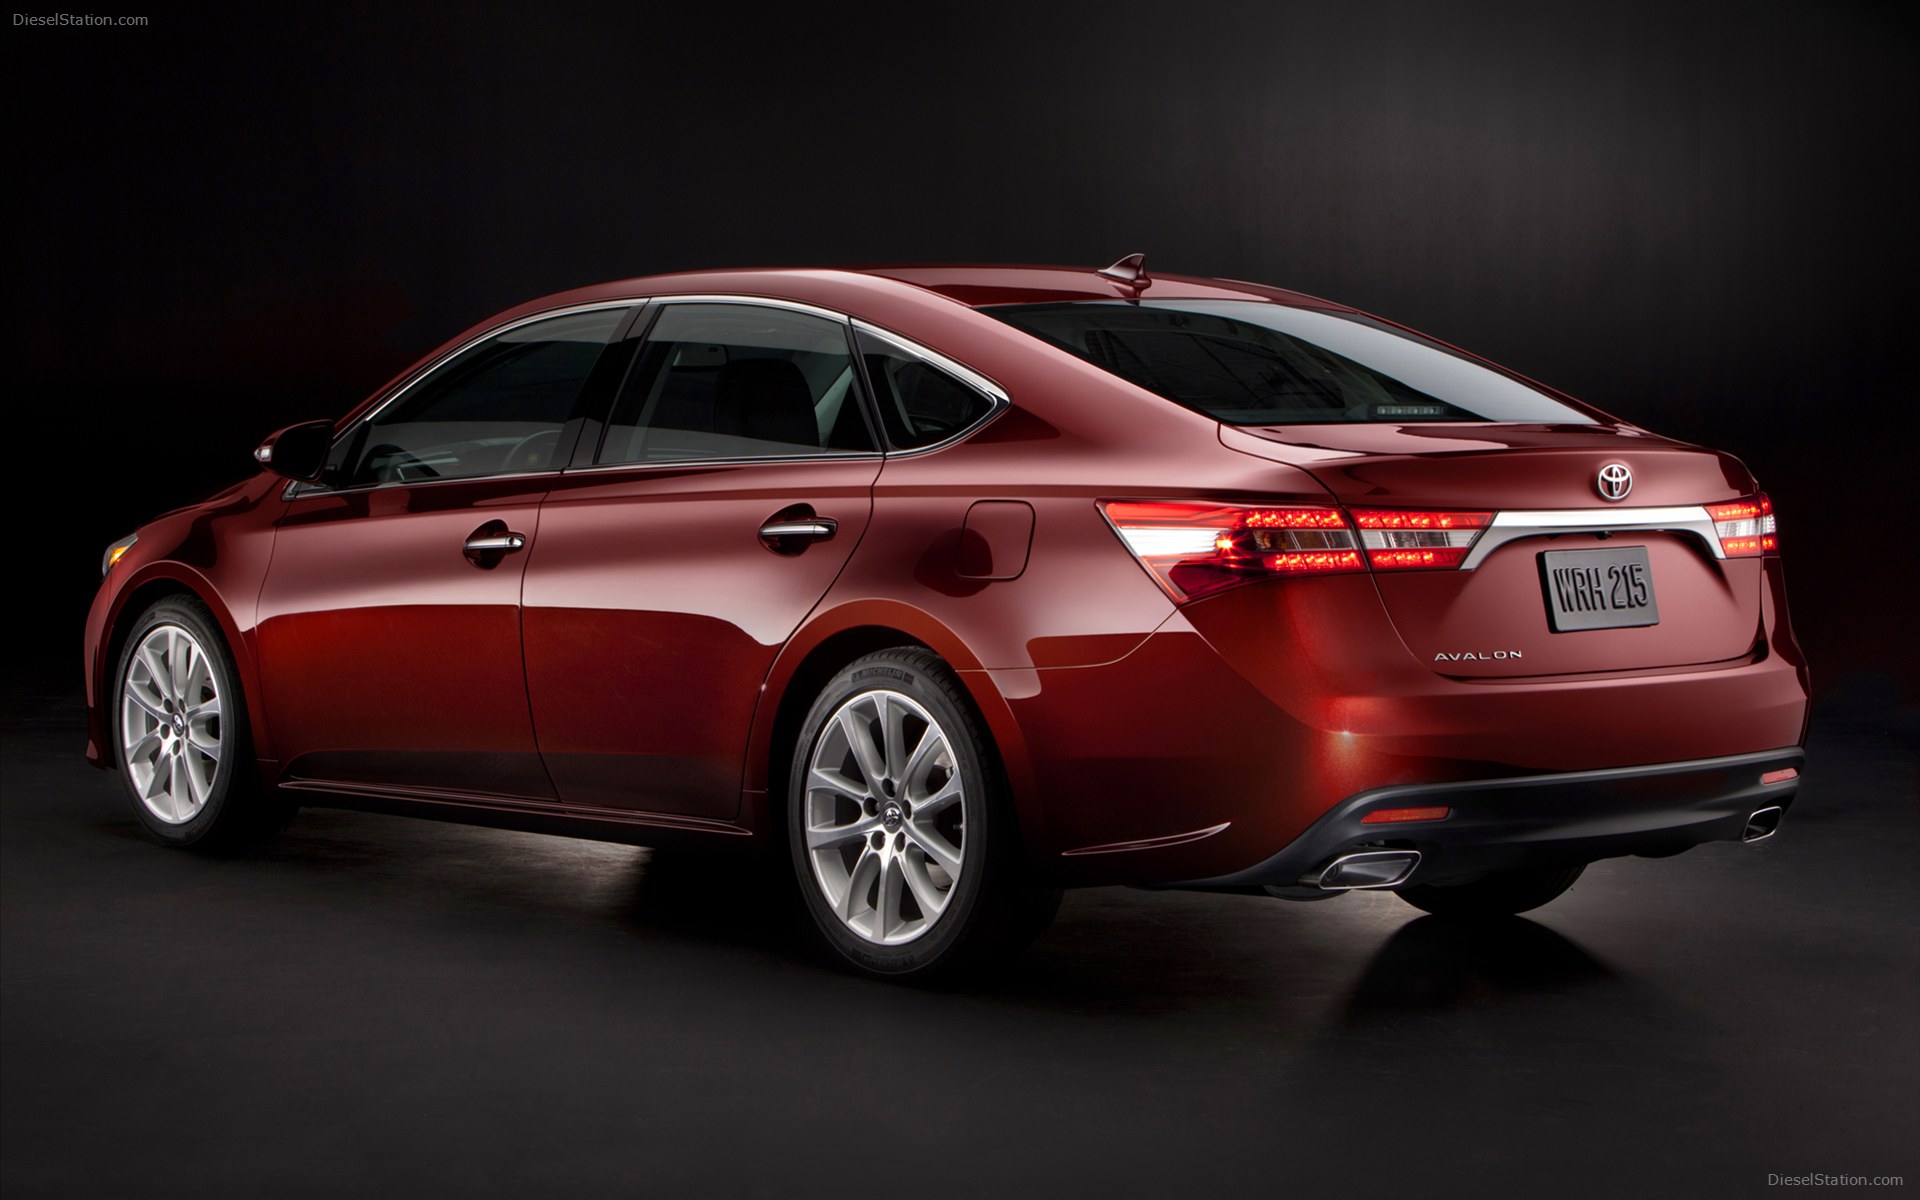 Toyota Avalon 2013 Widescreen Exotic Car Wallpapers 02 of